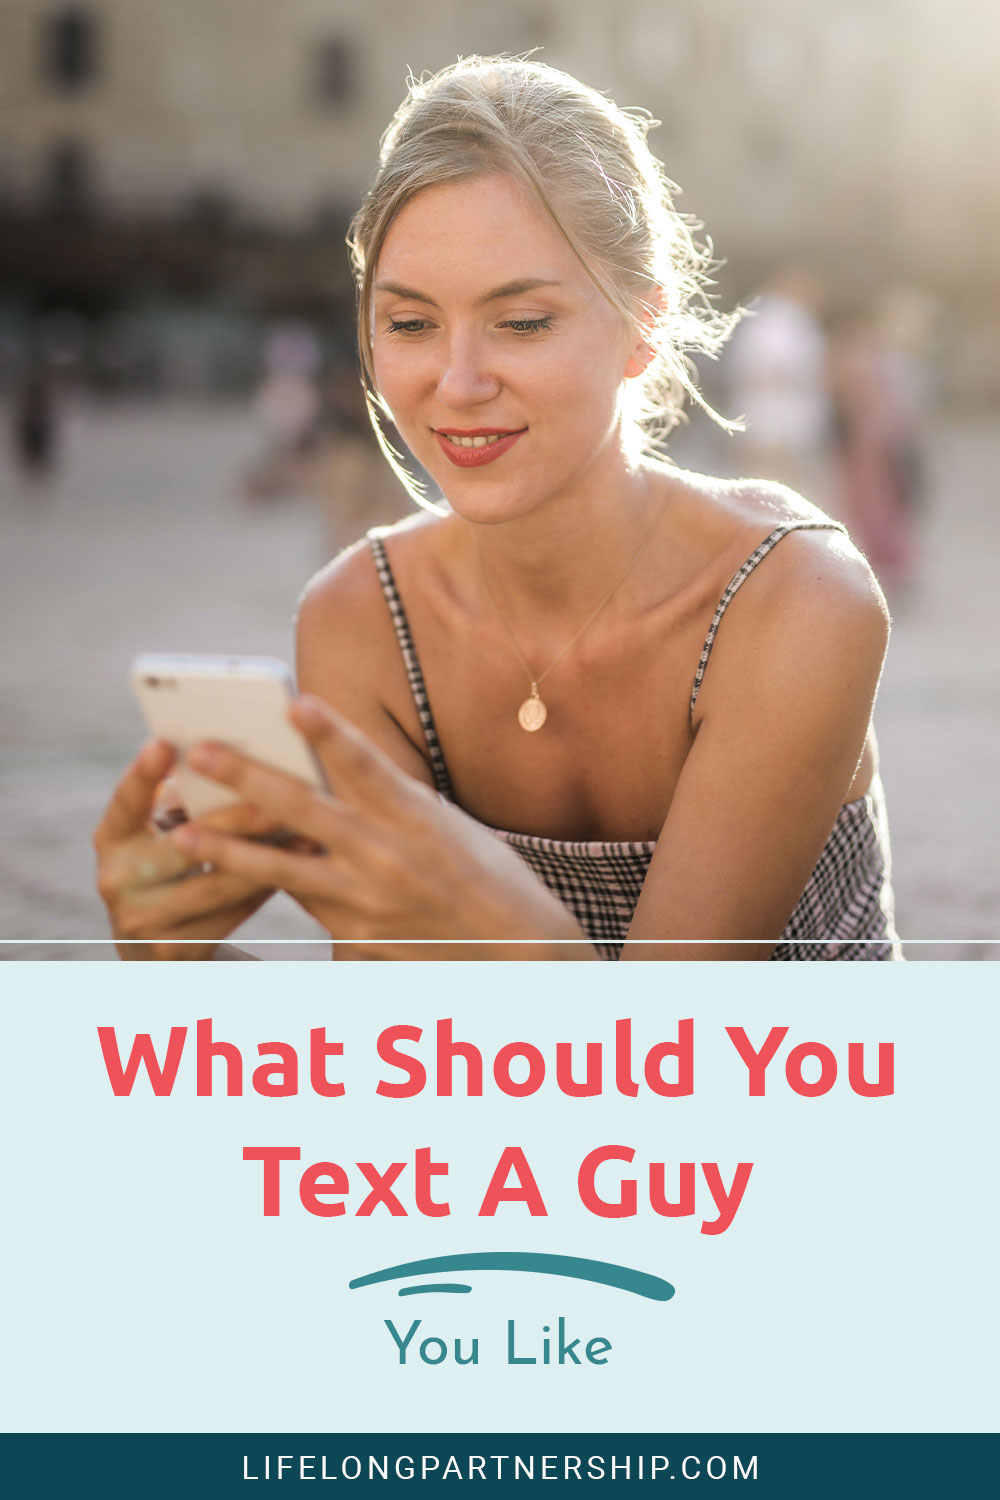 Woman texting on phone and smiling - What Should You Text A Guy You Like